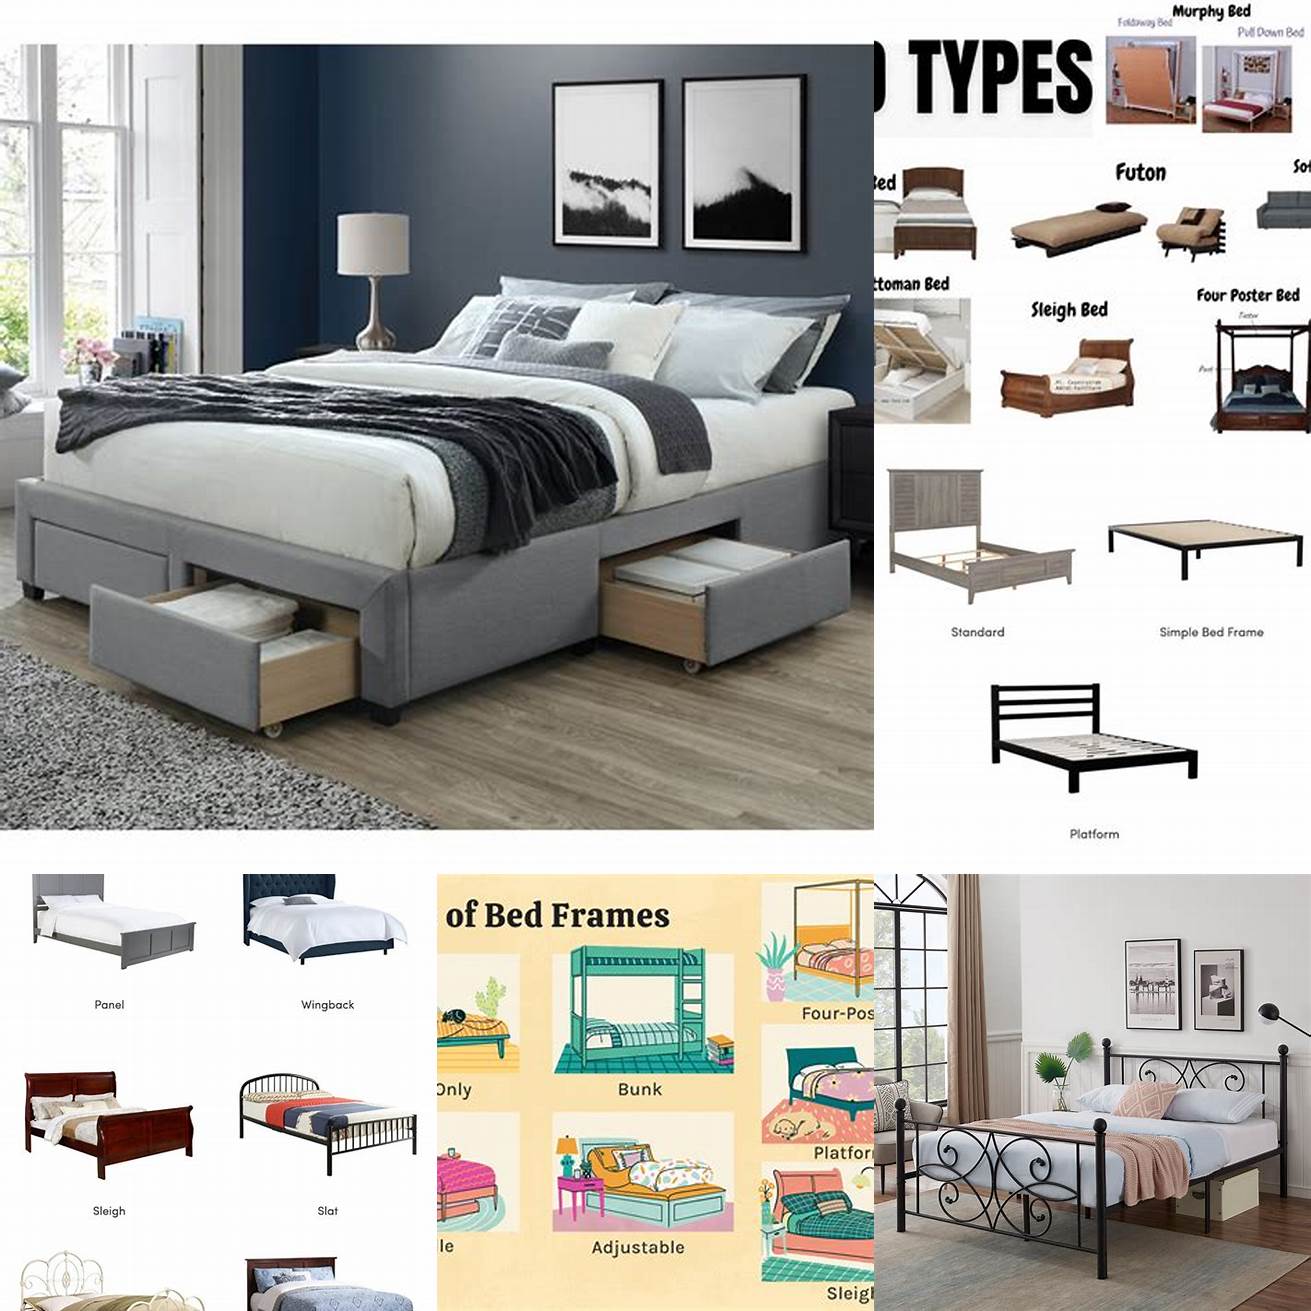 Several types of bed frames available to choose from